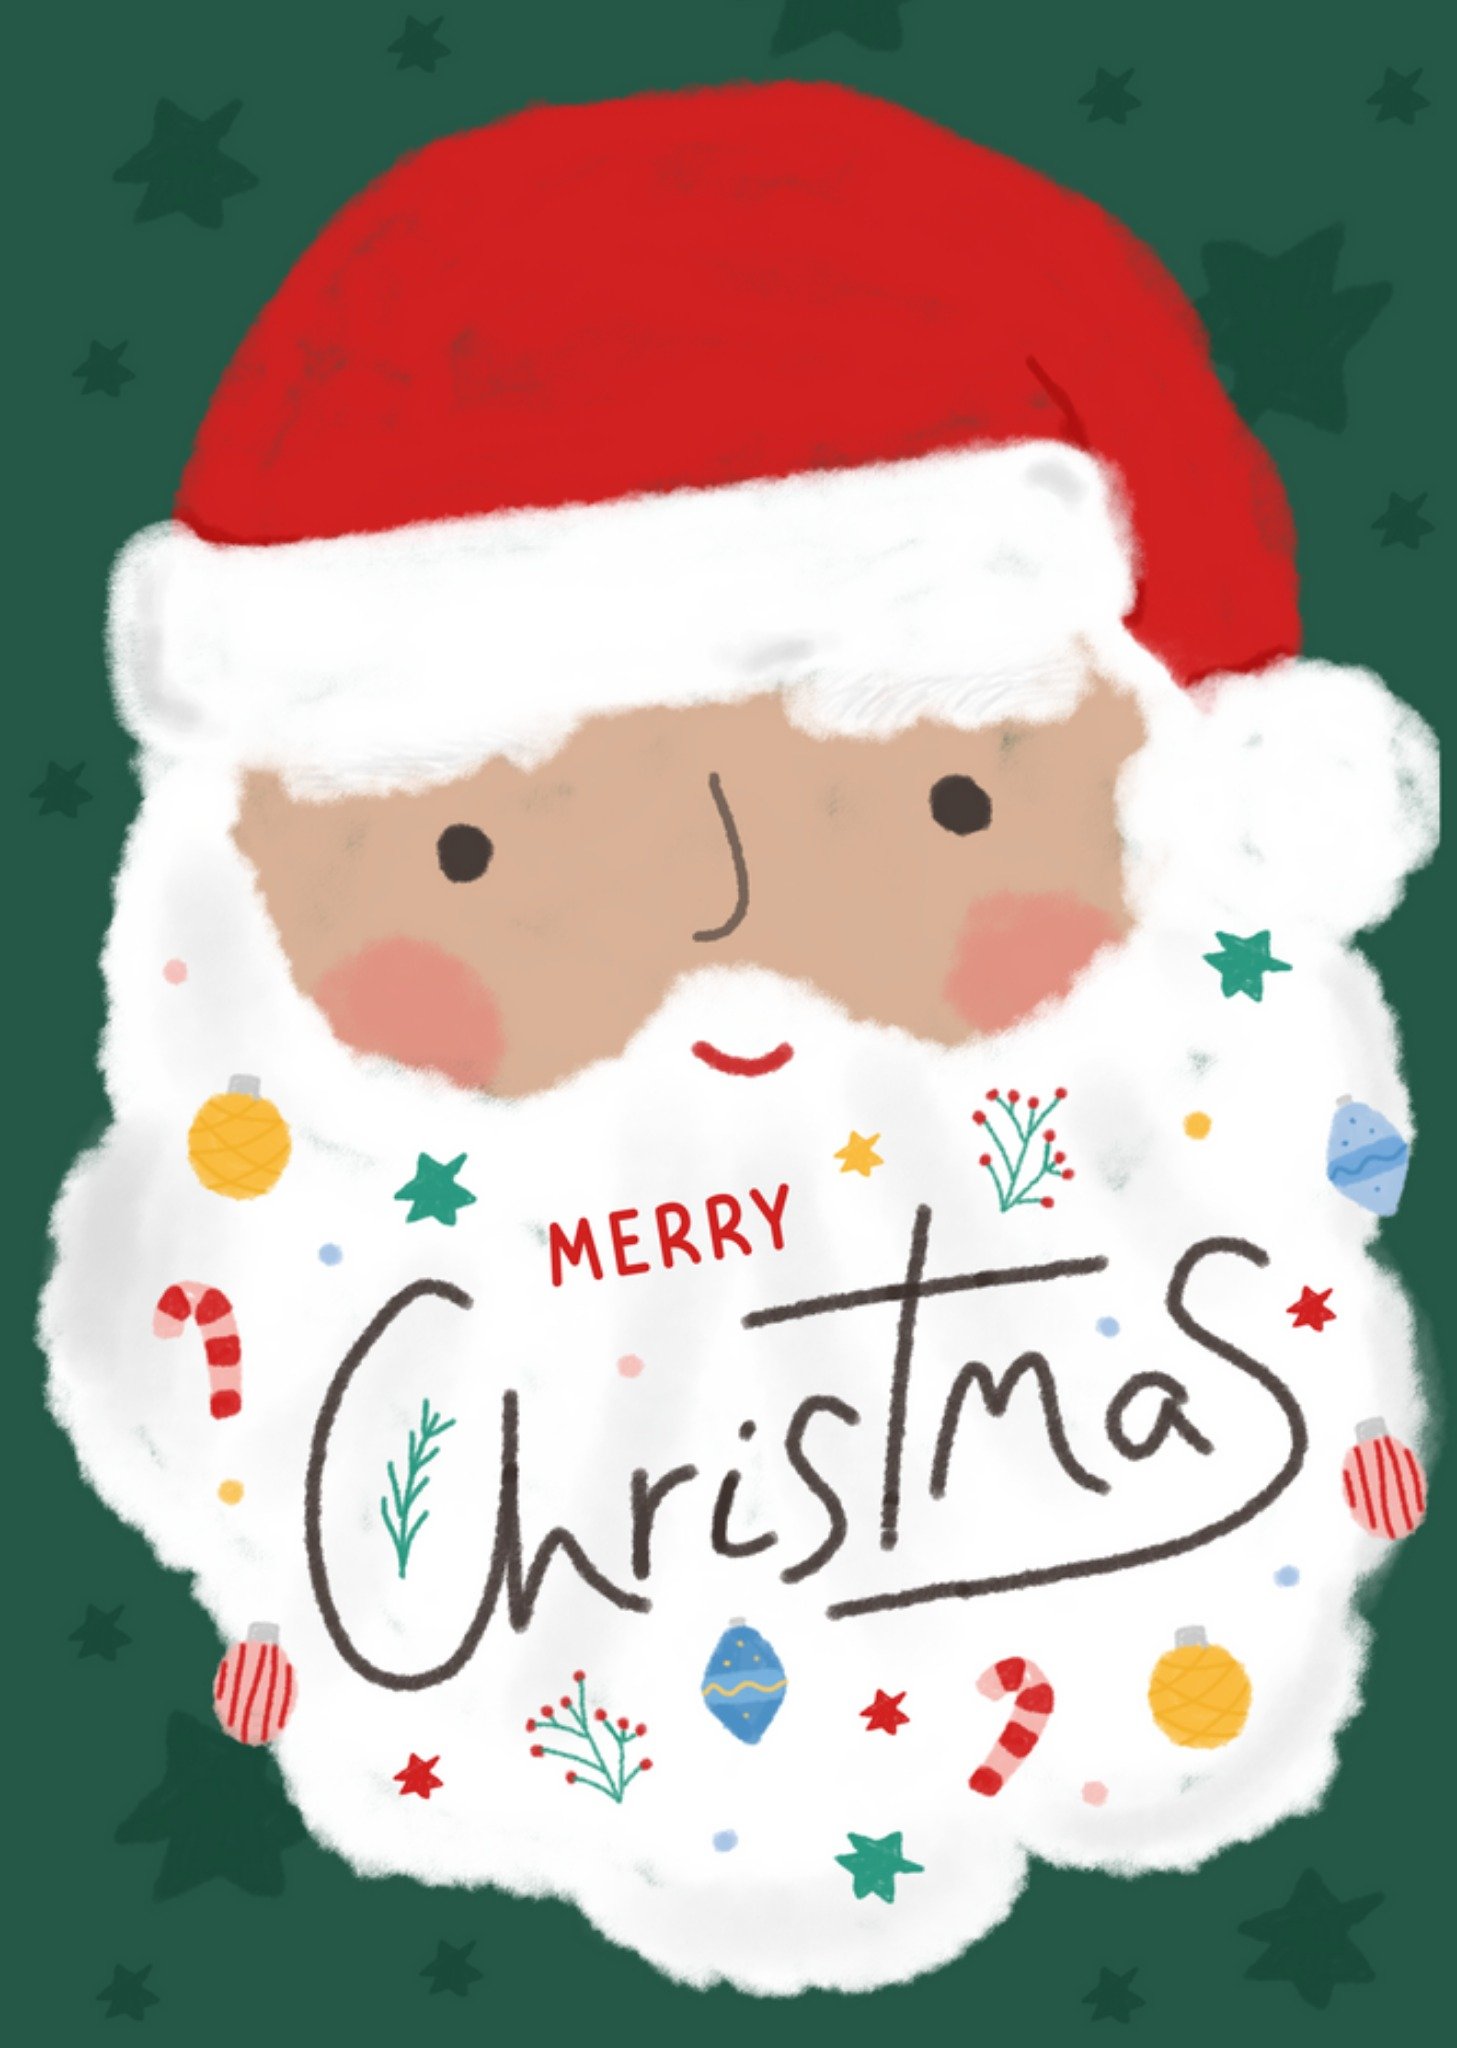 Moonpig Santa Claus With Baubles And Candy Canes Stuck In Beard Illustrated Christmas Card, Large